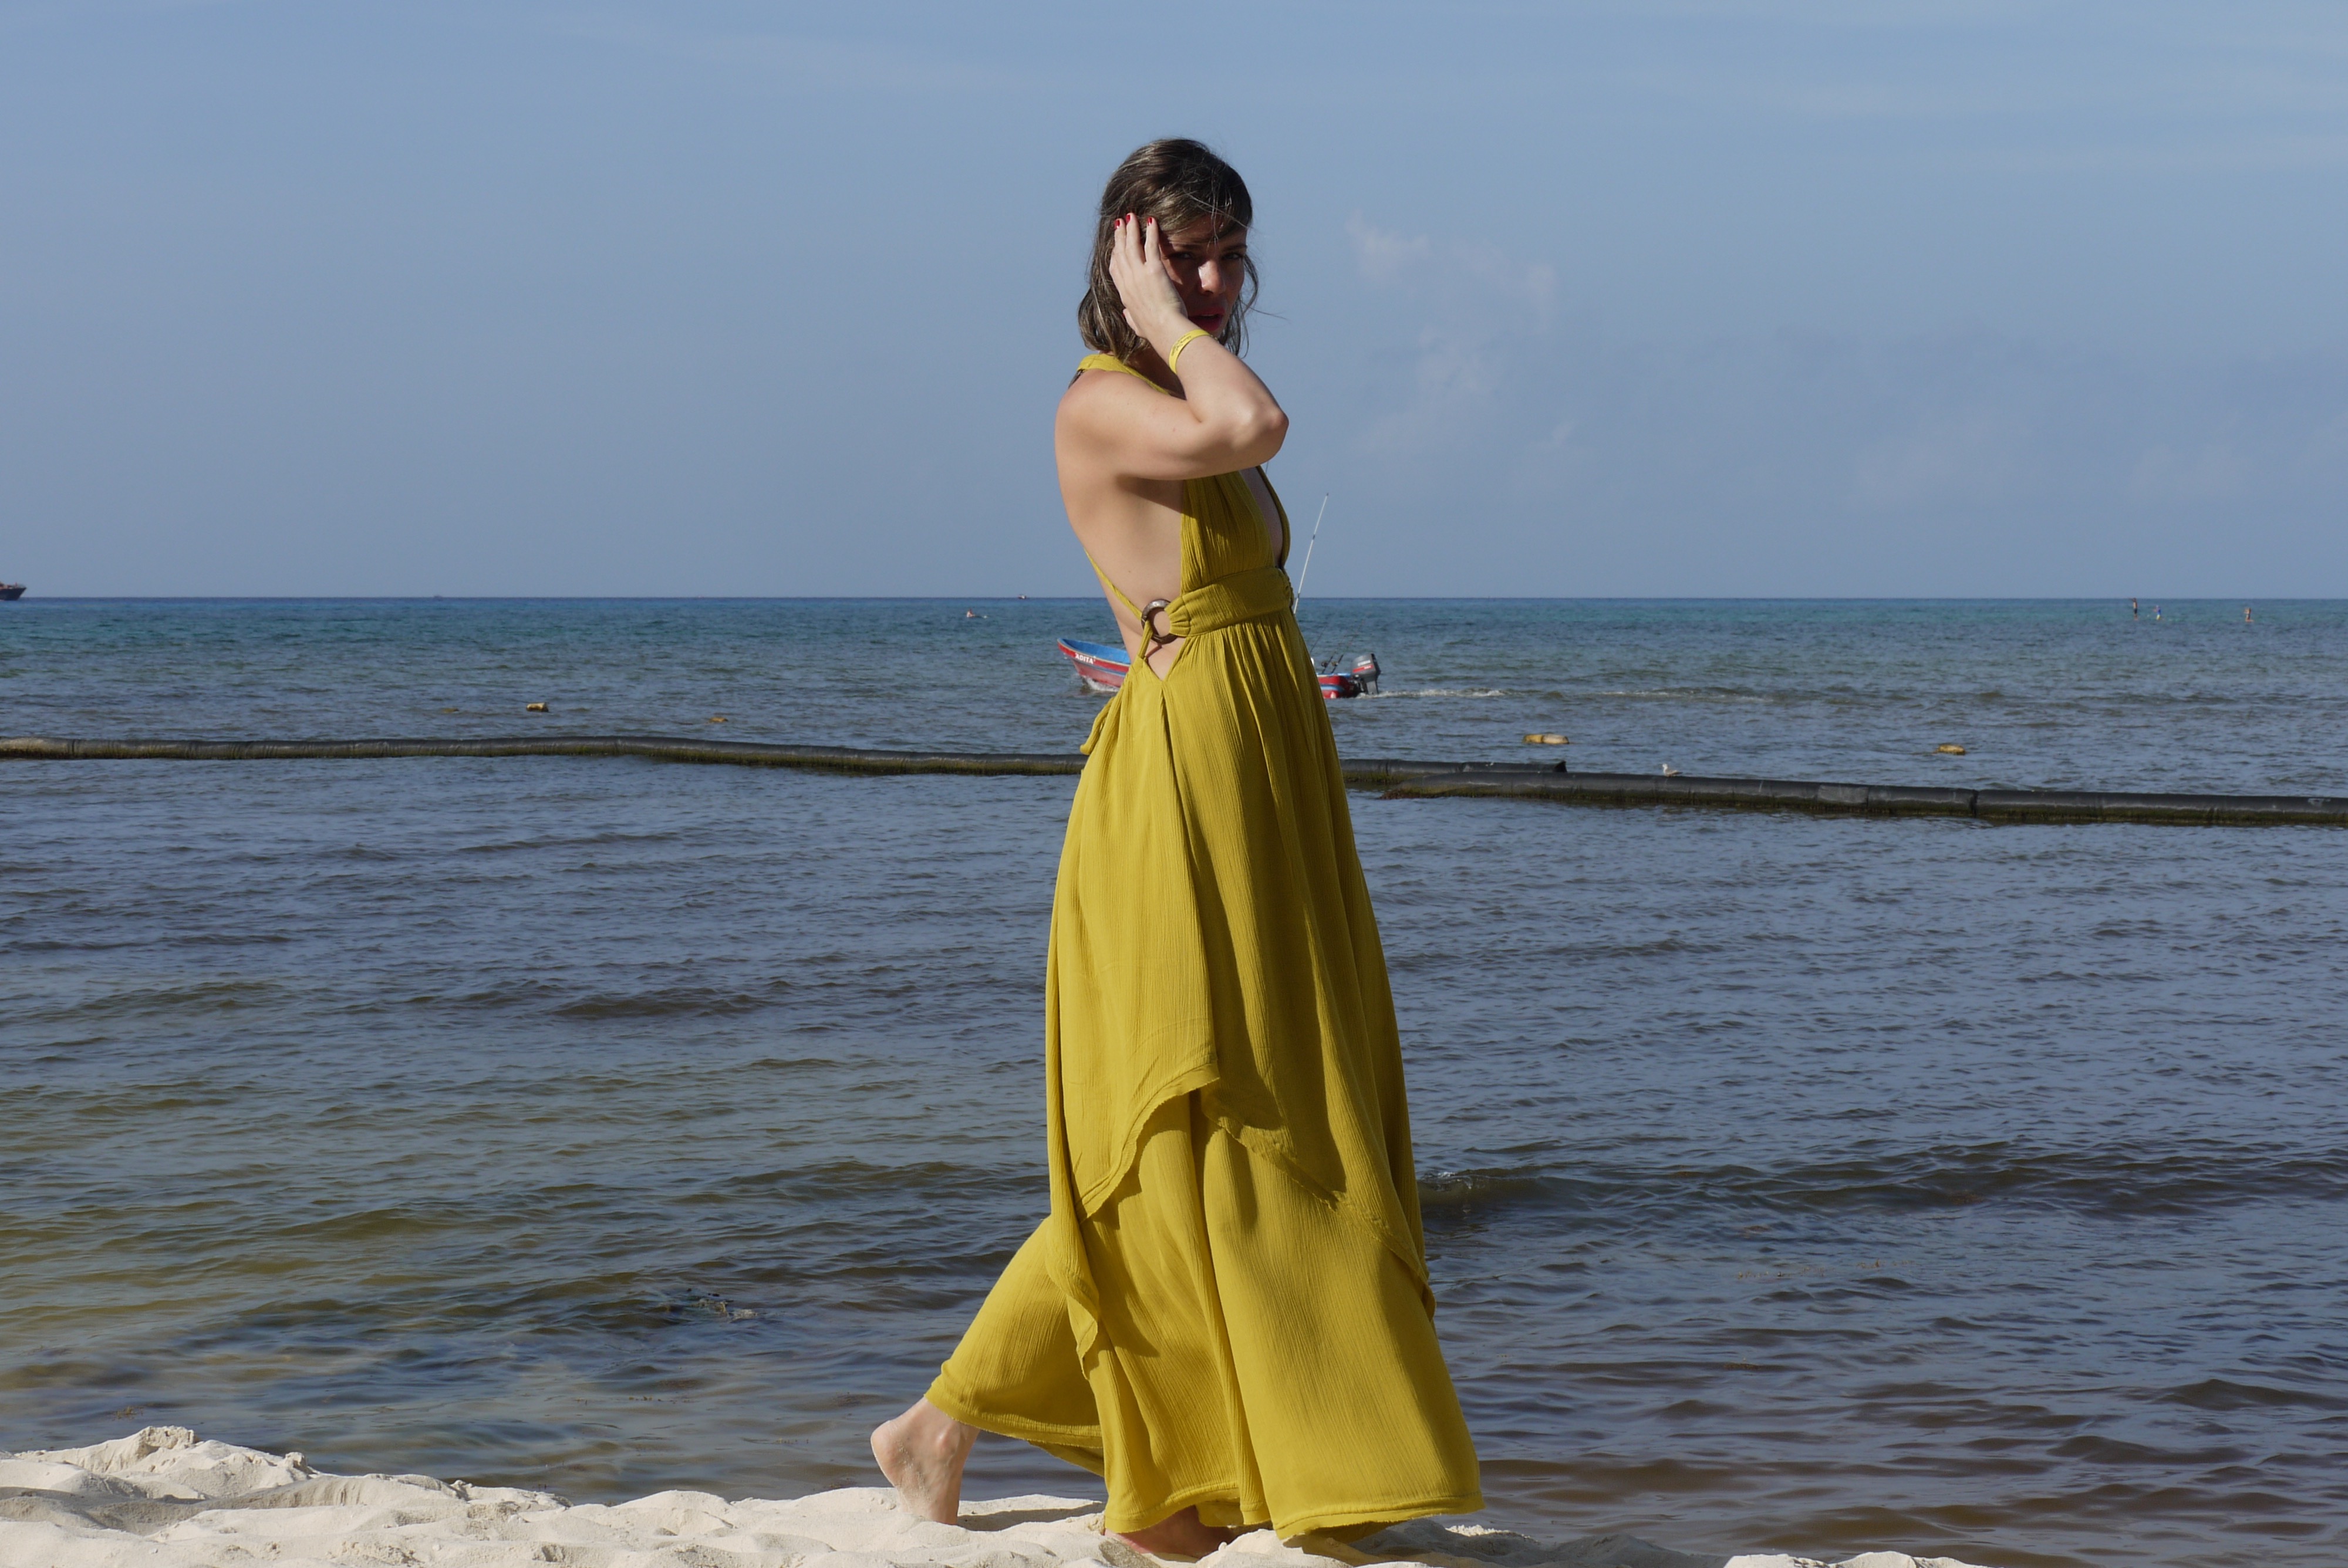 Alba Marina Otero fashion blogger from Mylovelypeople blog shares with you another part of her trip to Cancun with this lovely yellow dress